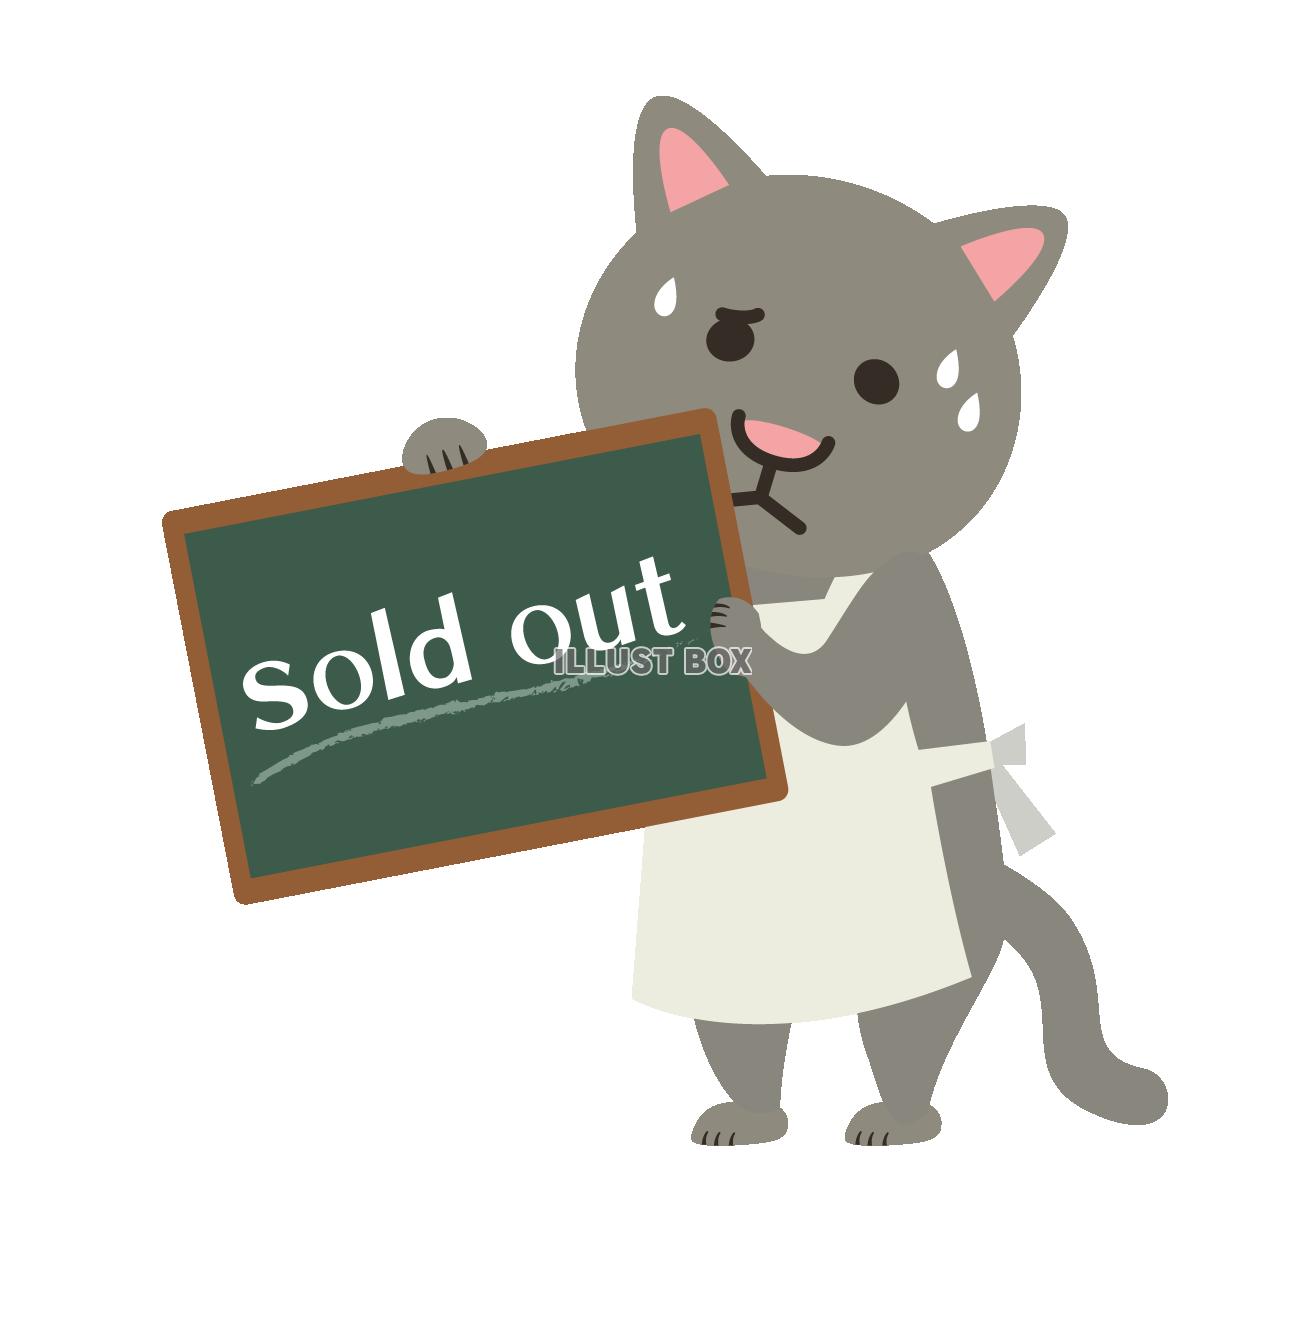 sold outの看板を持った猫（グレー）のイラスト